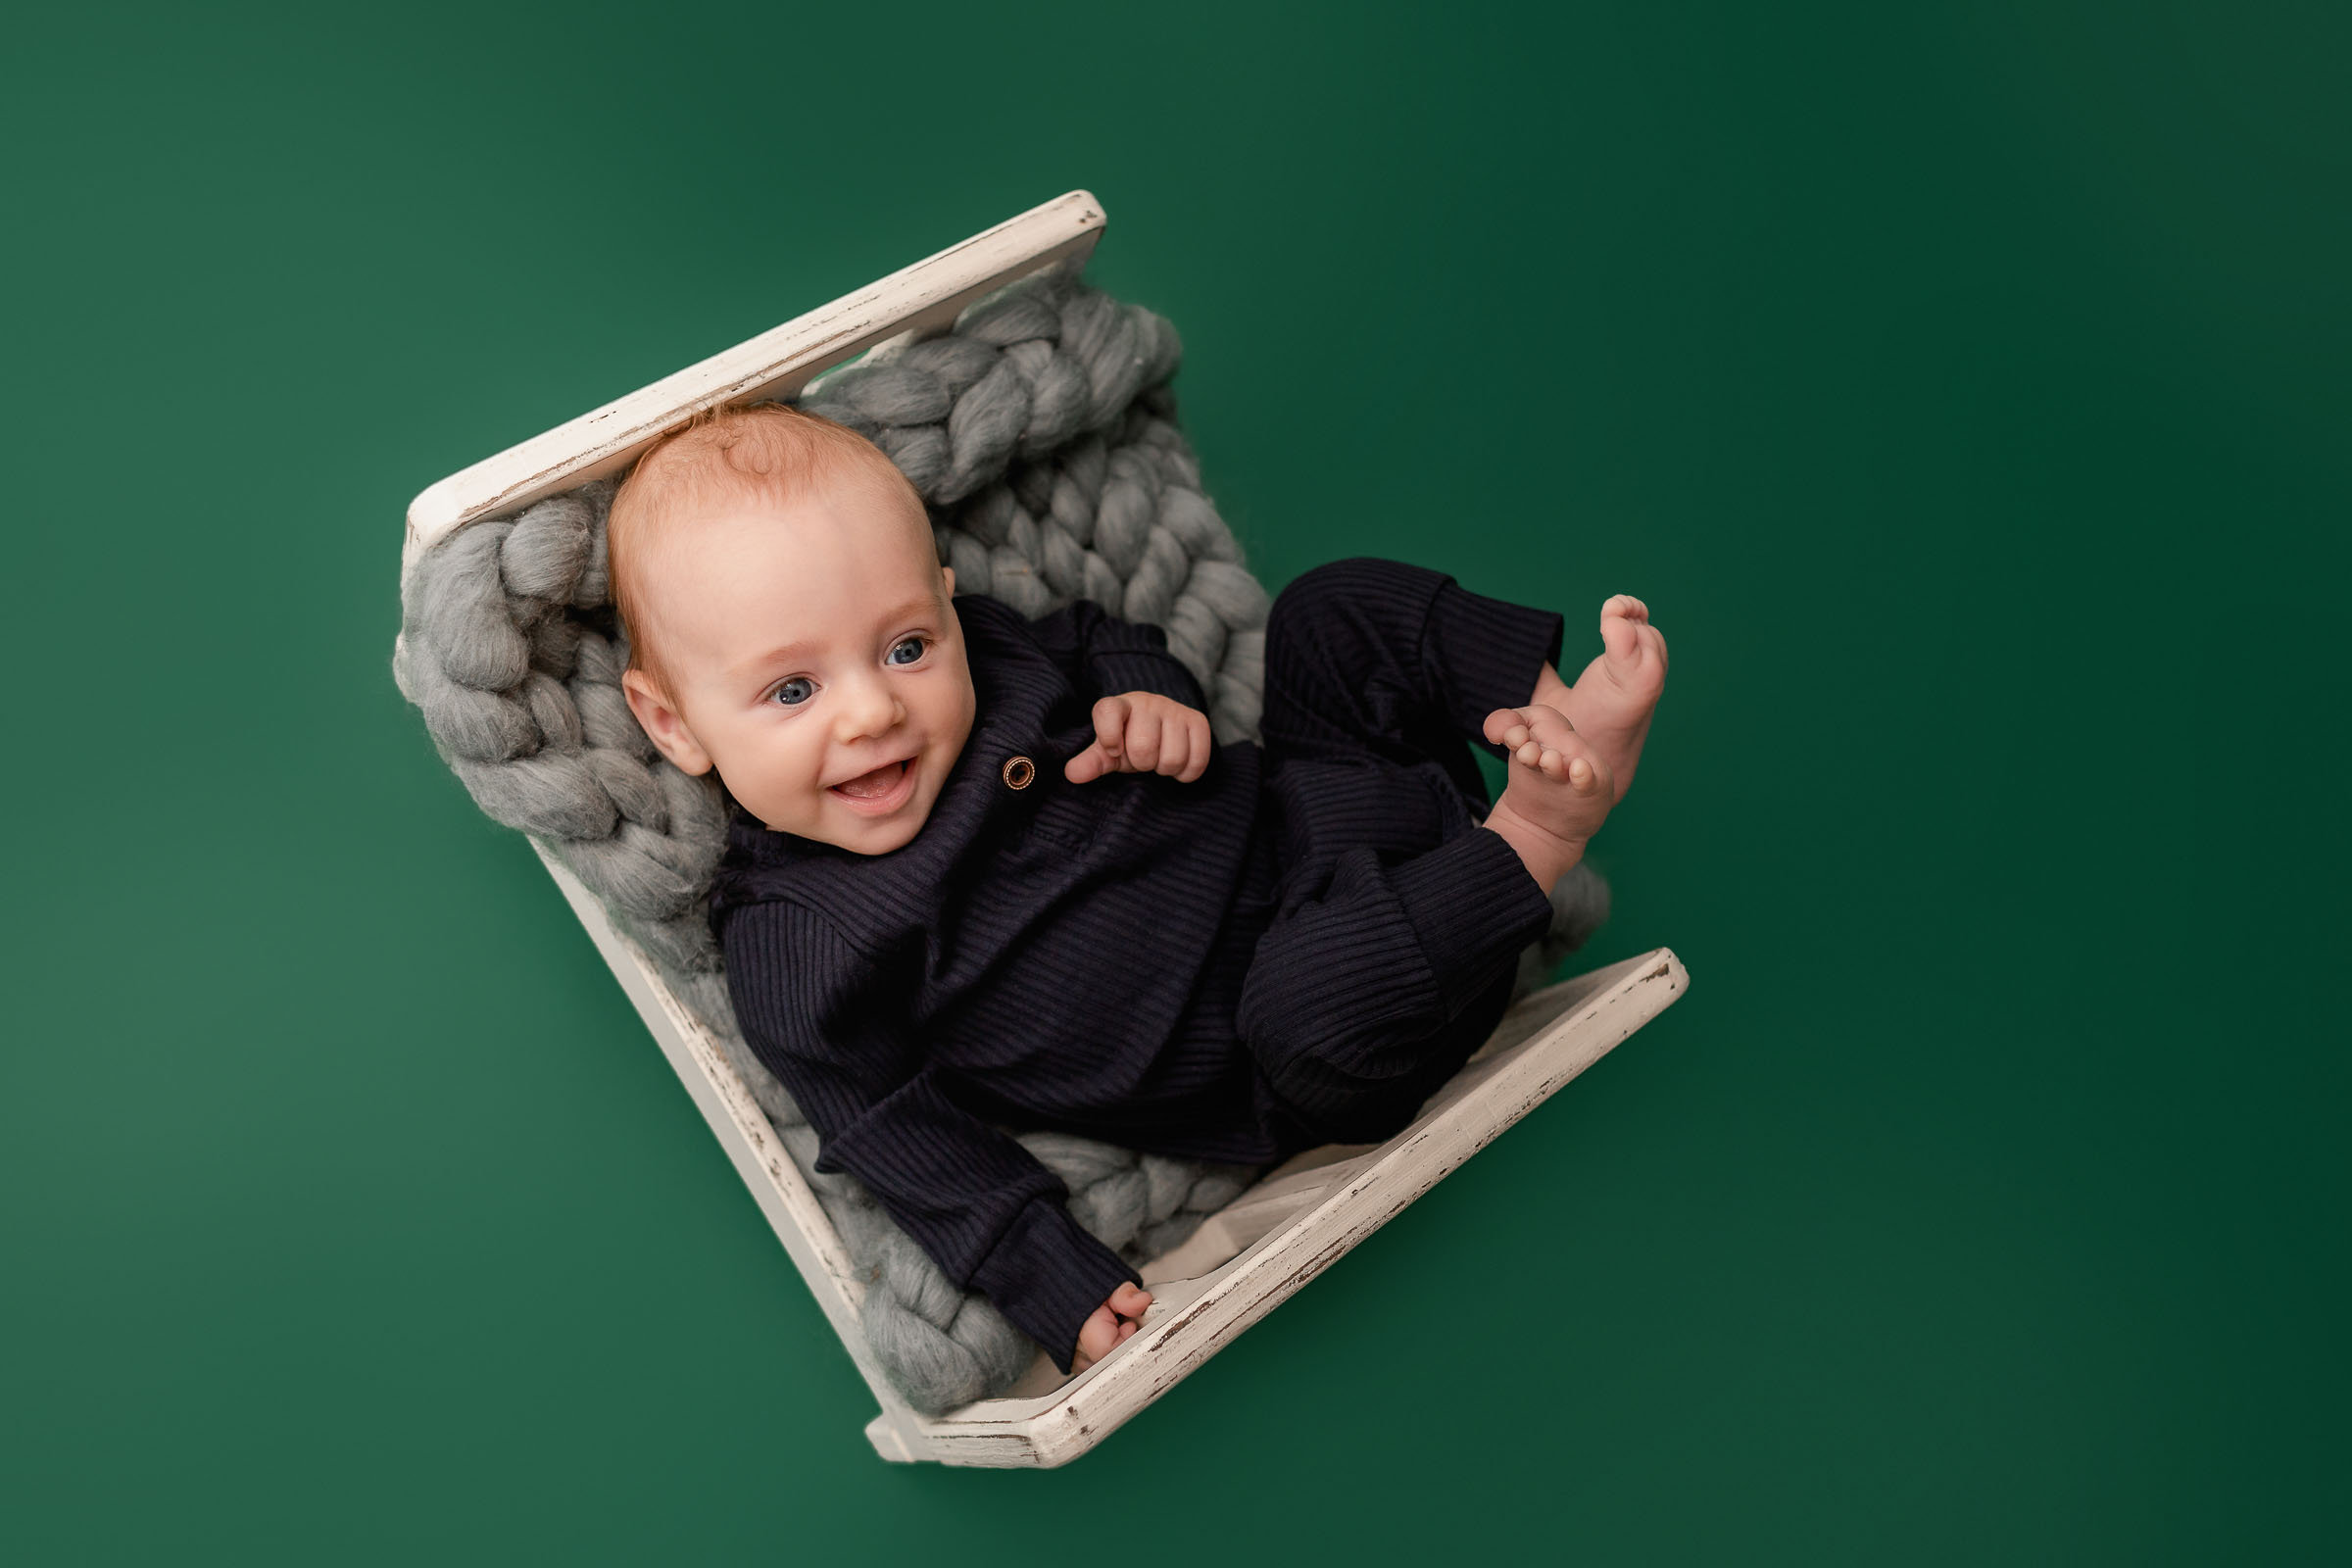 Happy 3 month old baby boy in blue outfit on bed on green backdrop